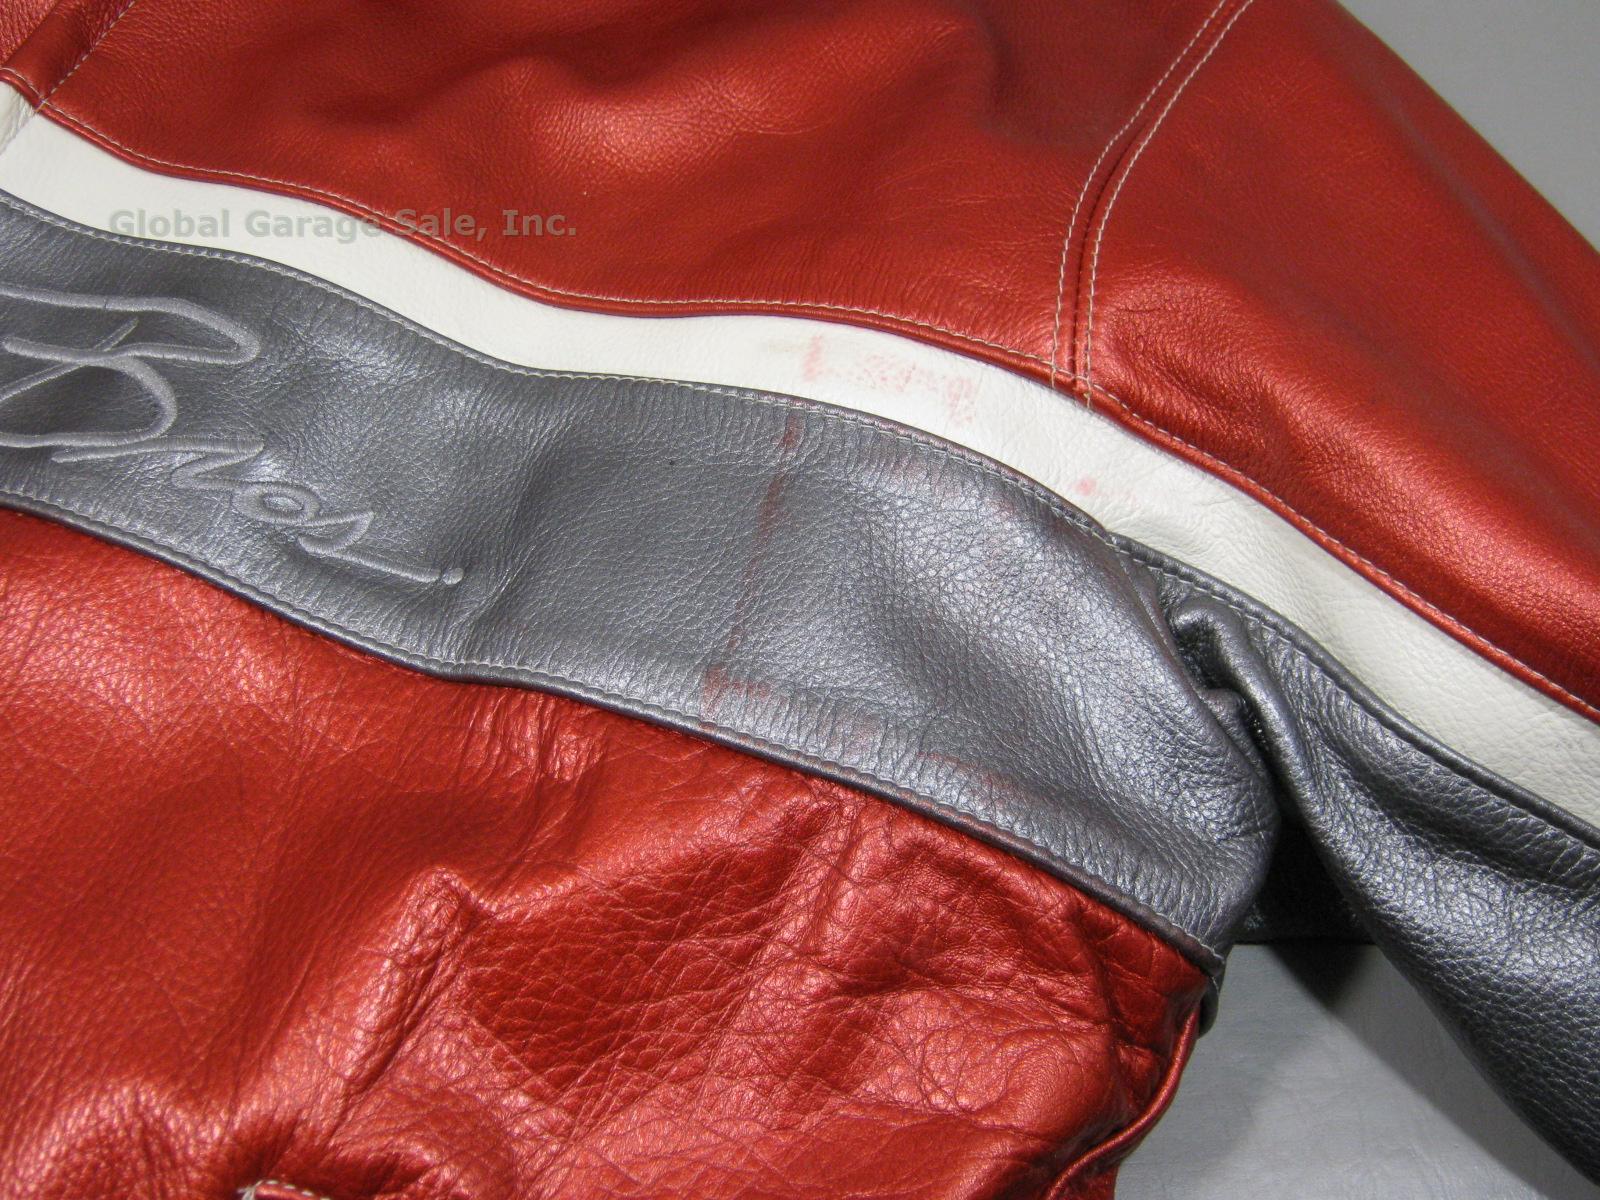 New Mens Schott MCMXIII 1913 Red Silver White Leather Motorcycle Jacket XXL 2XL 2